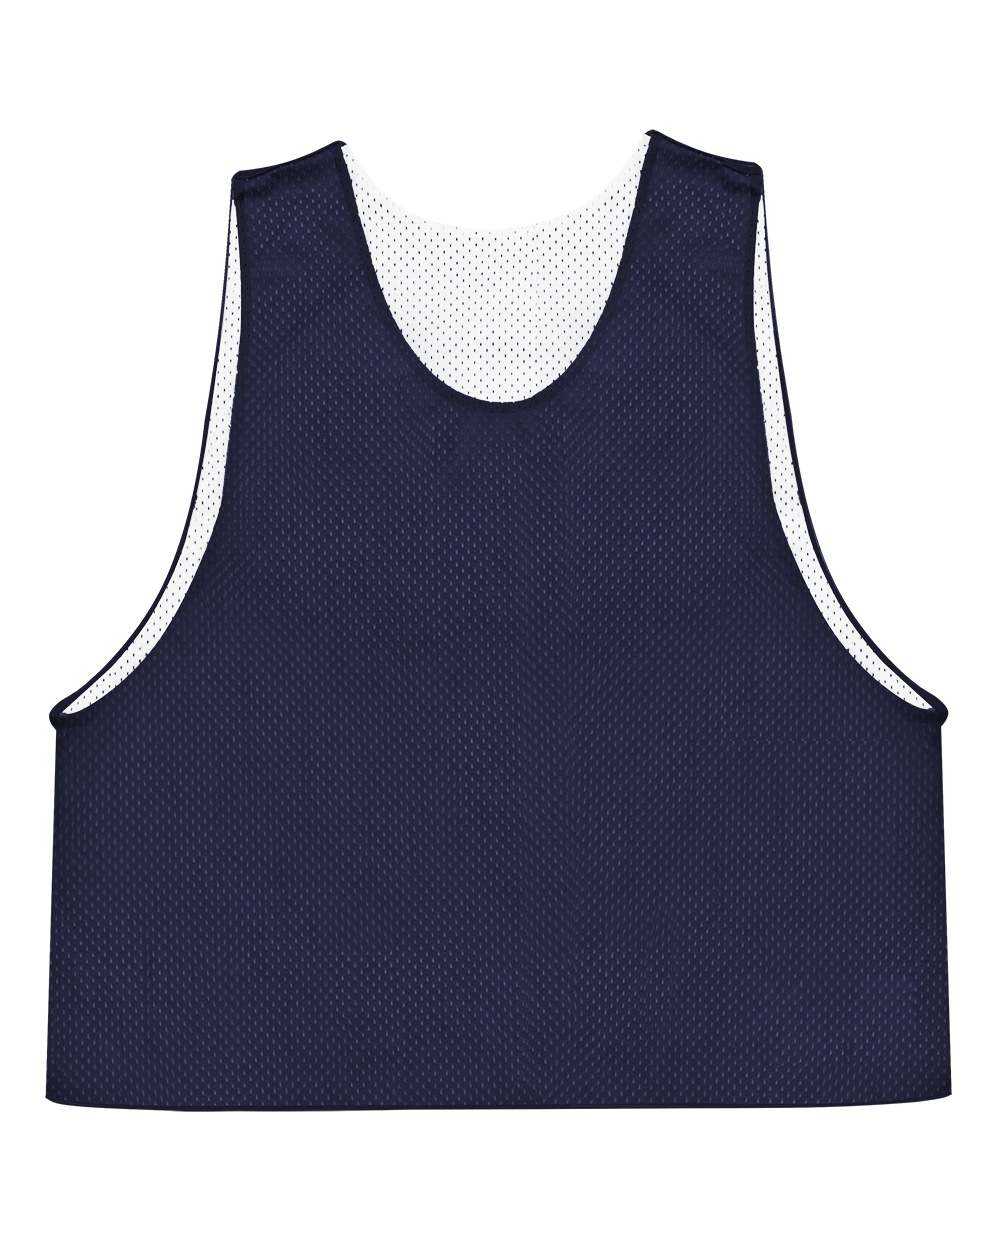 C2 Sport 5760 Mesh Reversible Pinnie - Navy White - HIT a Double - 1